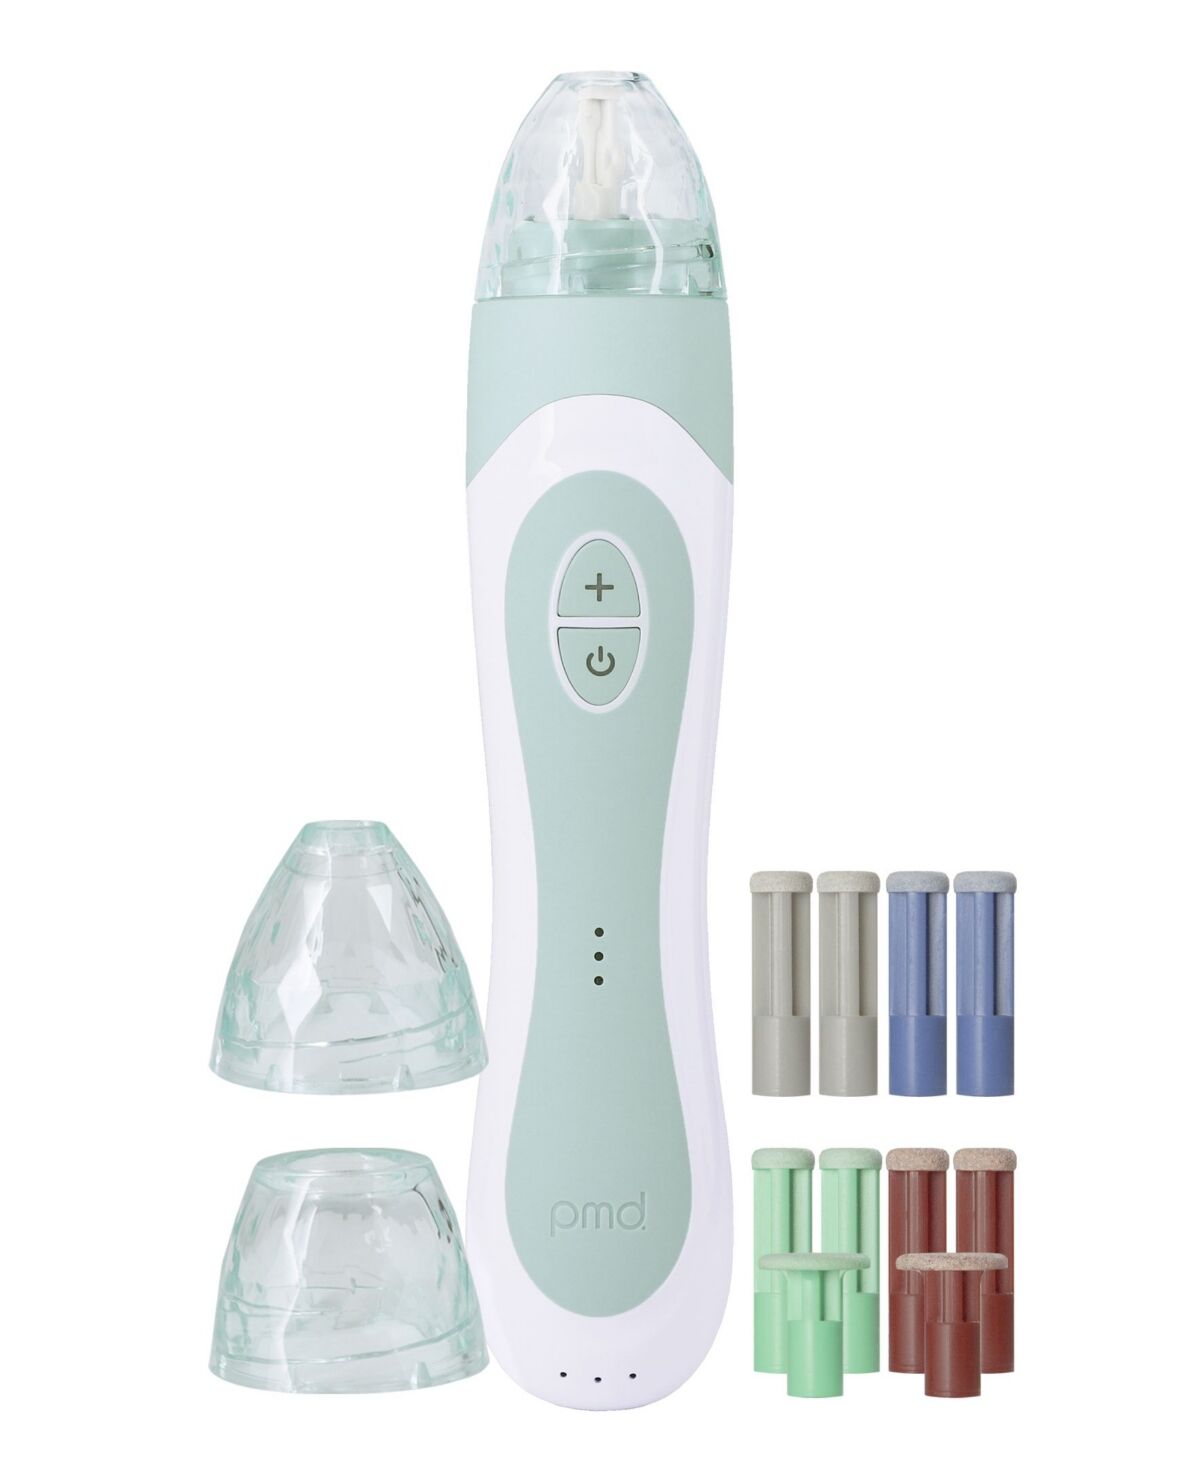 pmd Personal Microderm Elite Pro - Baby Blue